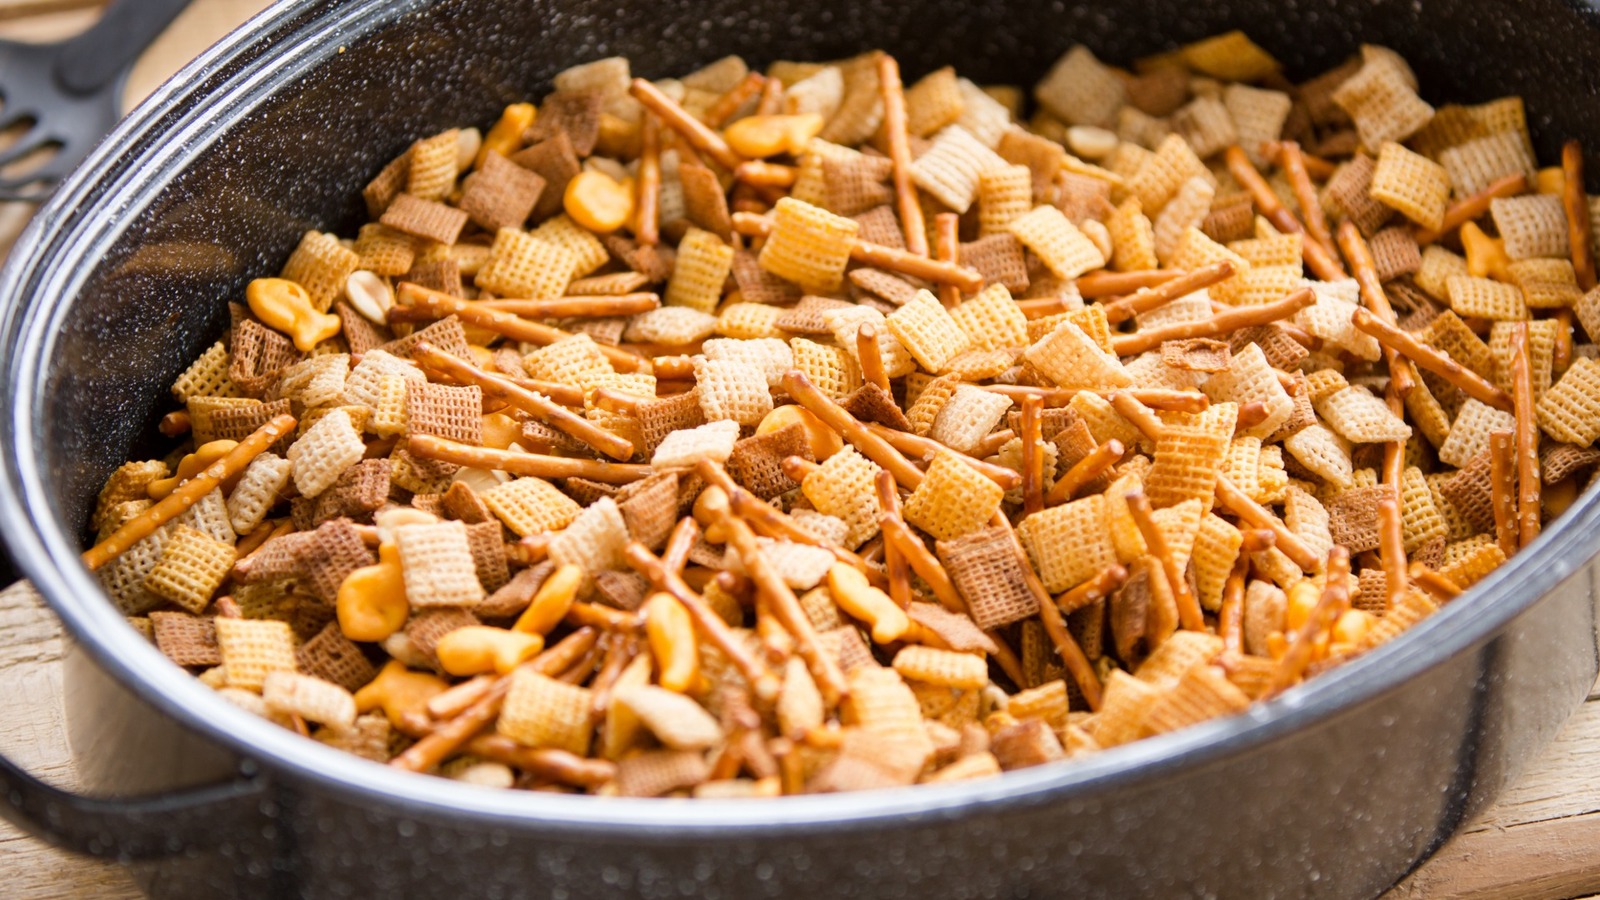 https://www.tastingtable.com/img/gallery/theres-no-better-way-to-boost-homemade-chex-mix-than-with-ranch-seasoning/l-intro-1704301269.jpg